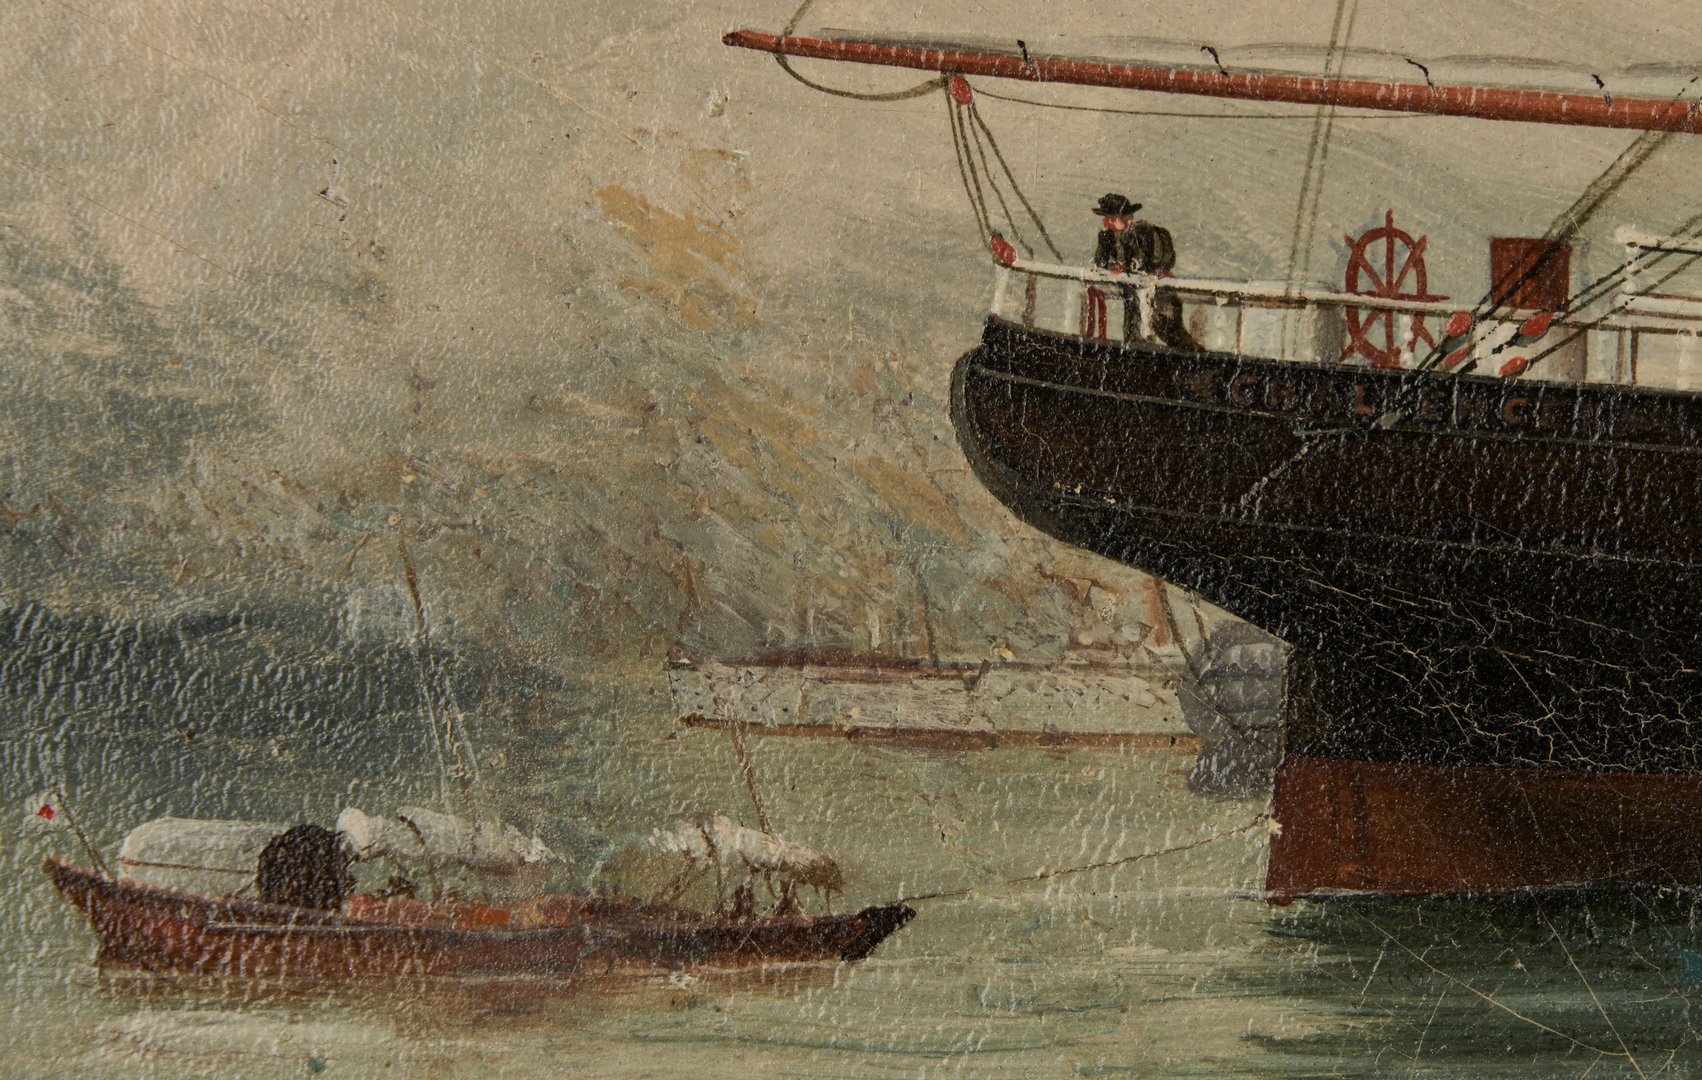 Lot 122: Chinese Export Marine Painting, Challenger